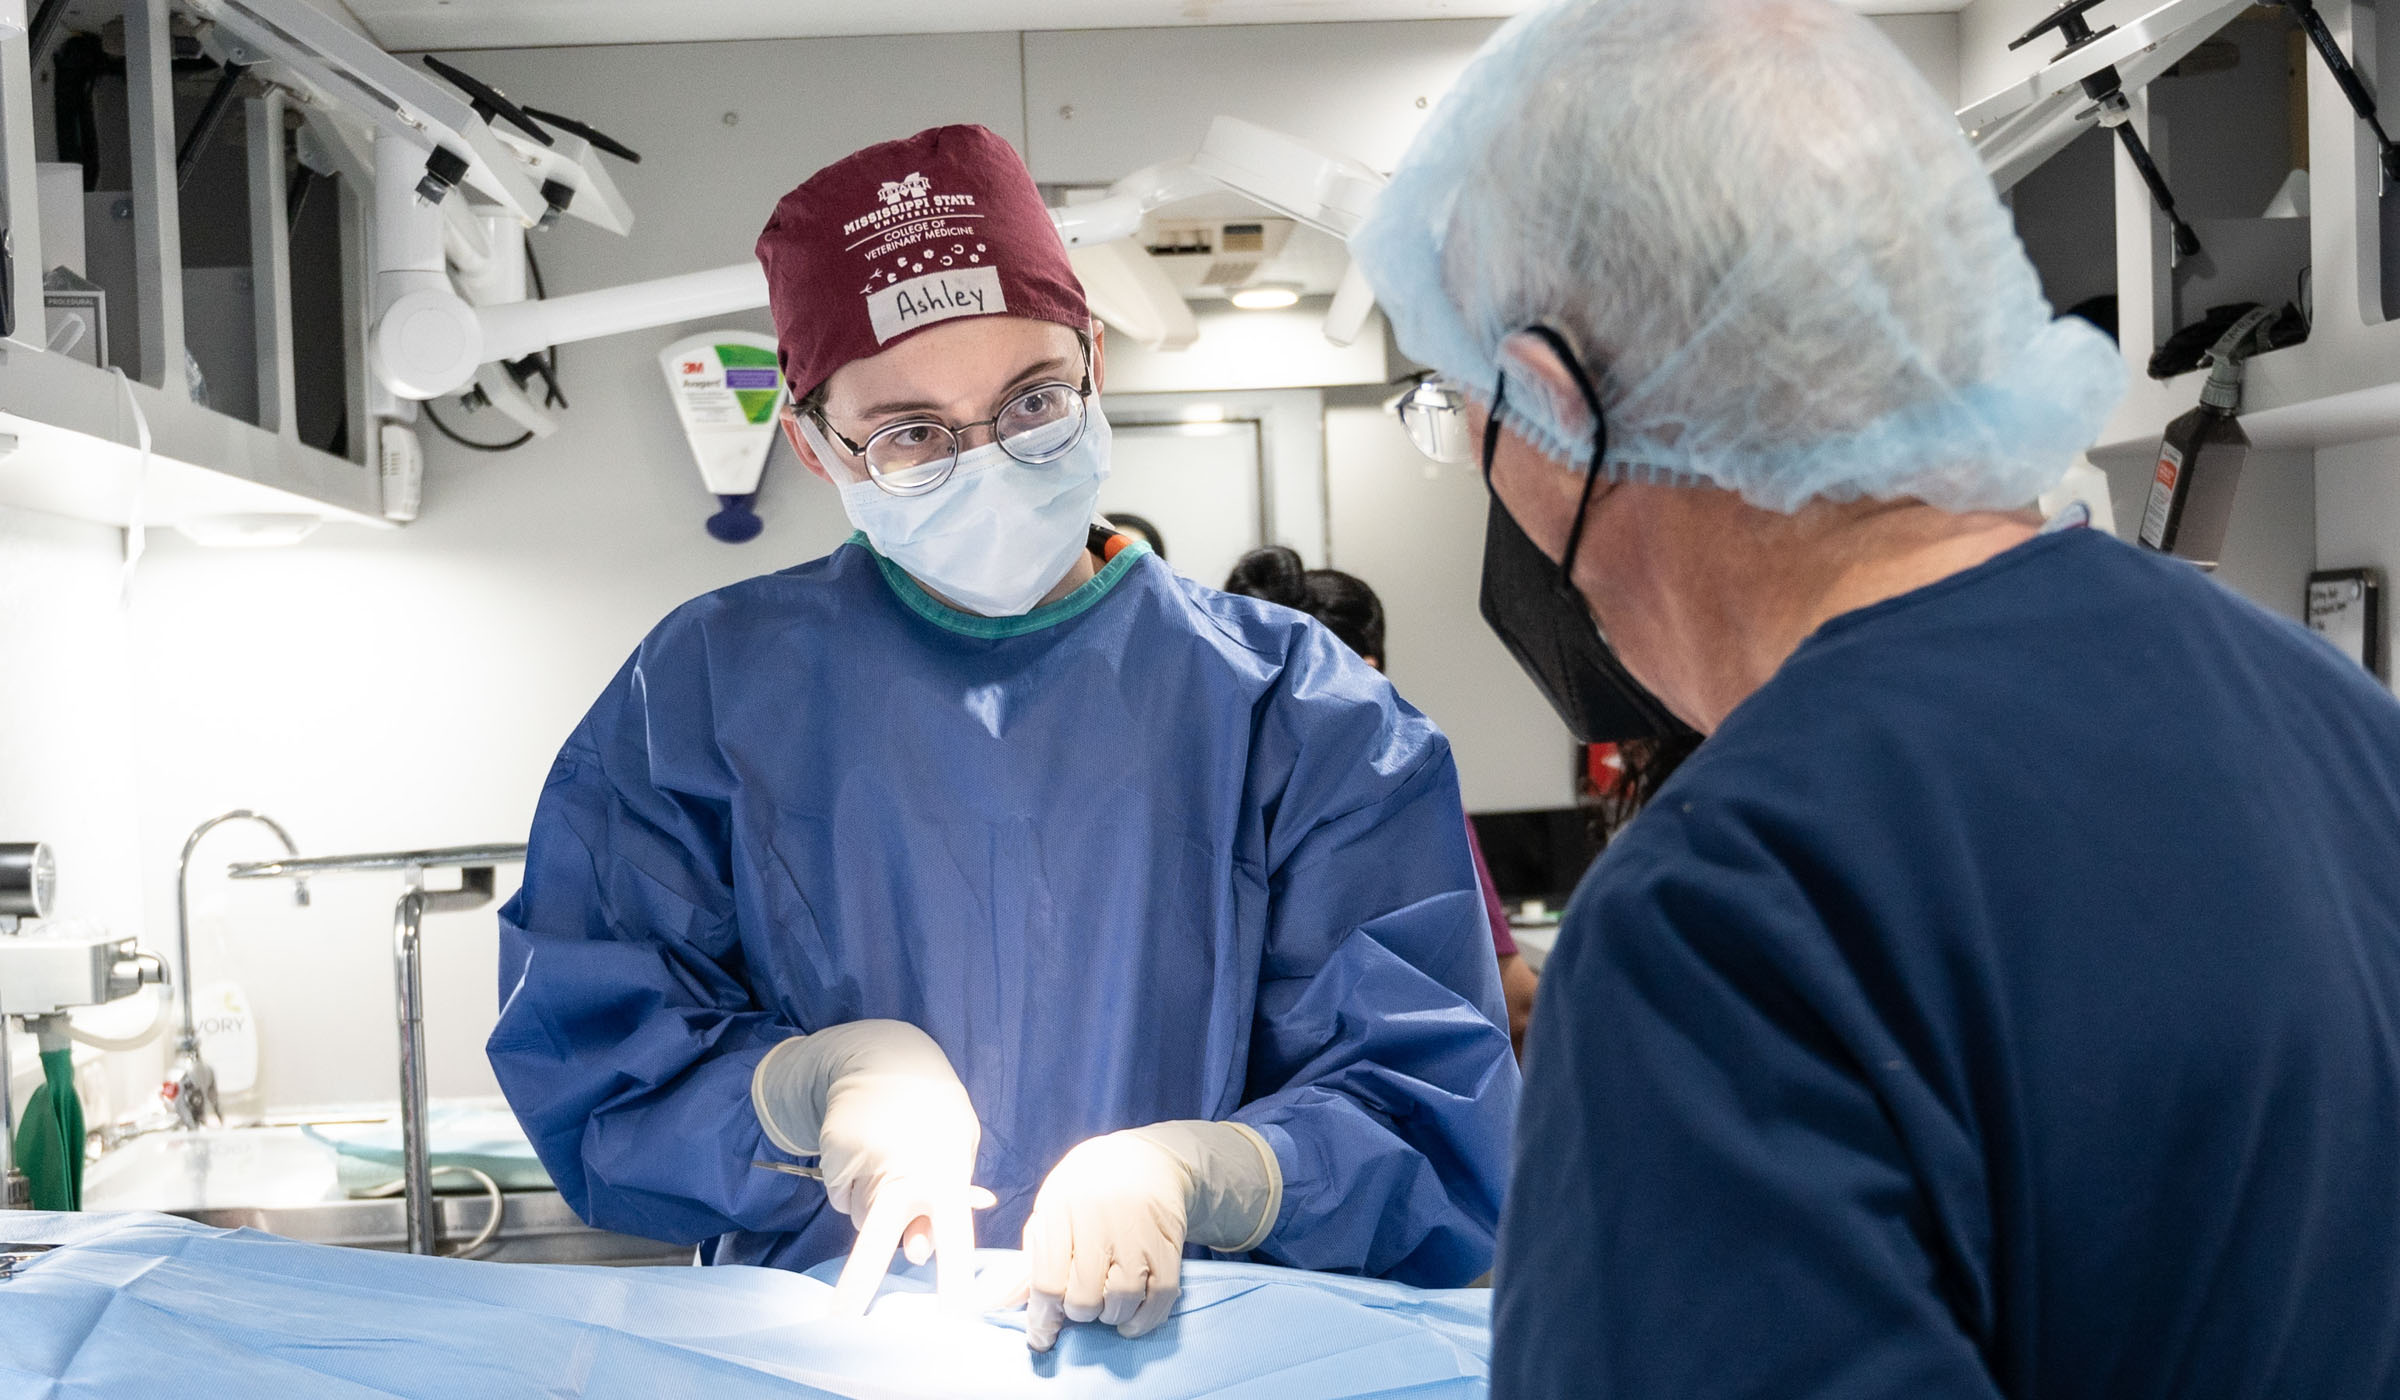 CVM student Ashley Smith conducts 500th surgery in mobile veterinary unit, with Dr. Phil Busby supervising.